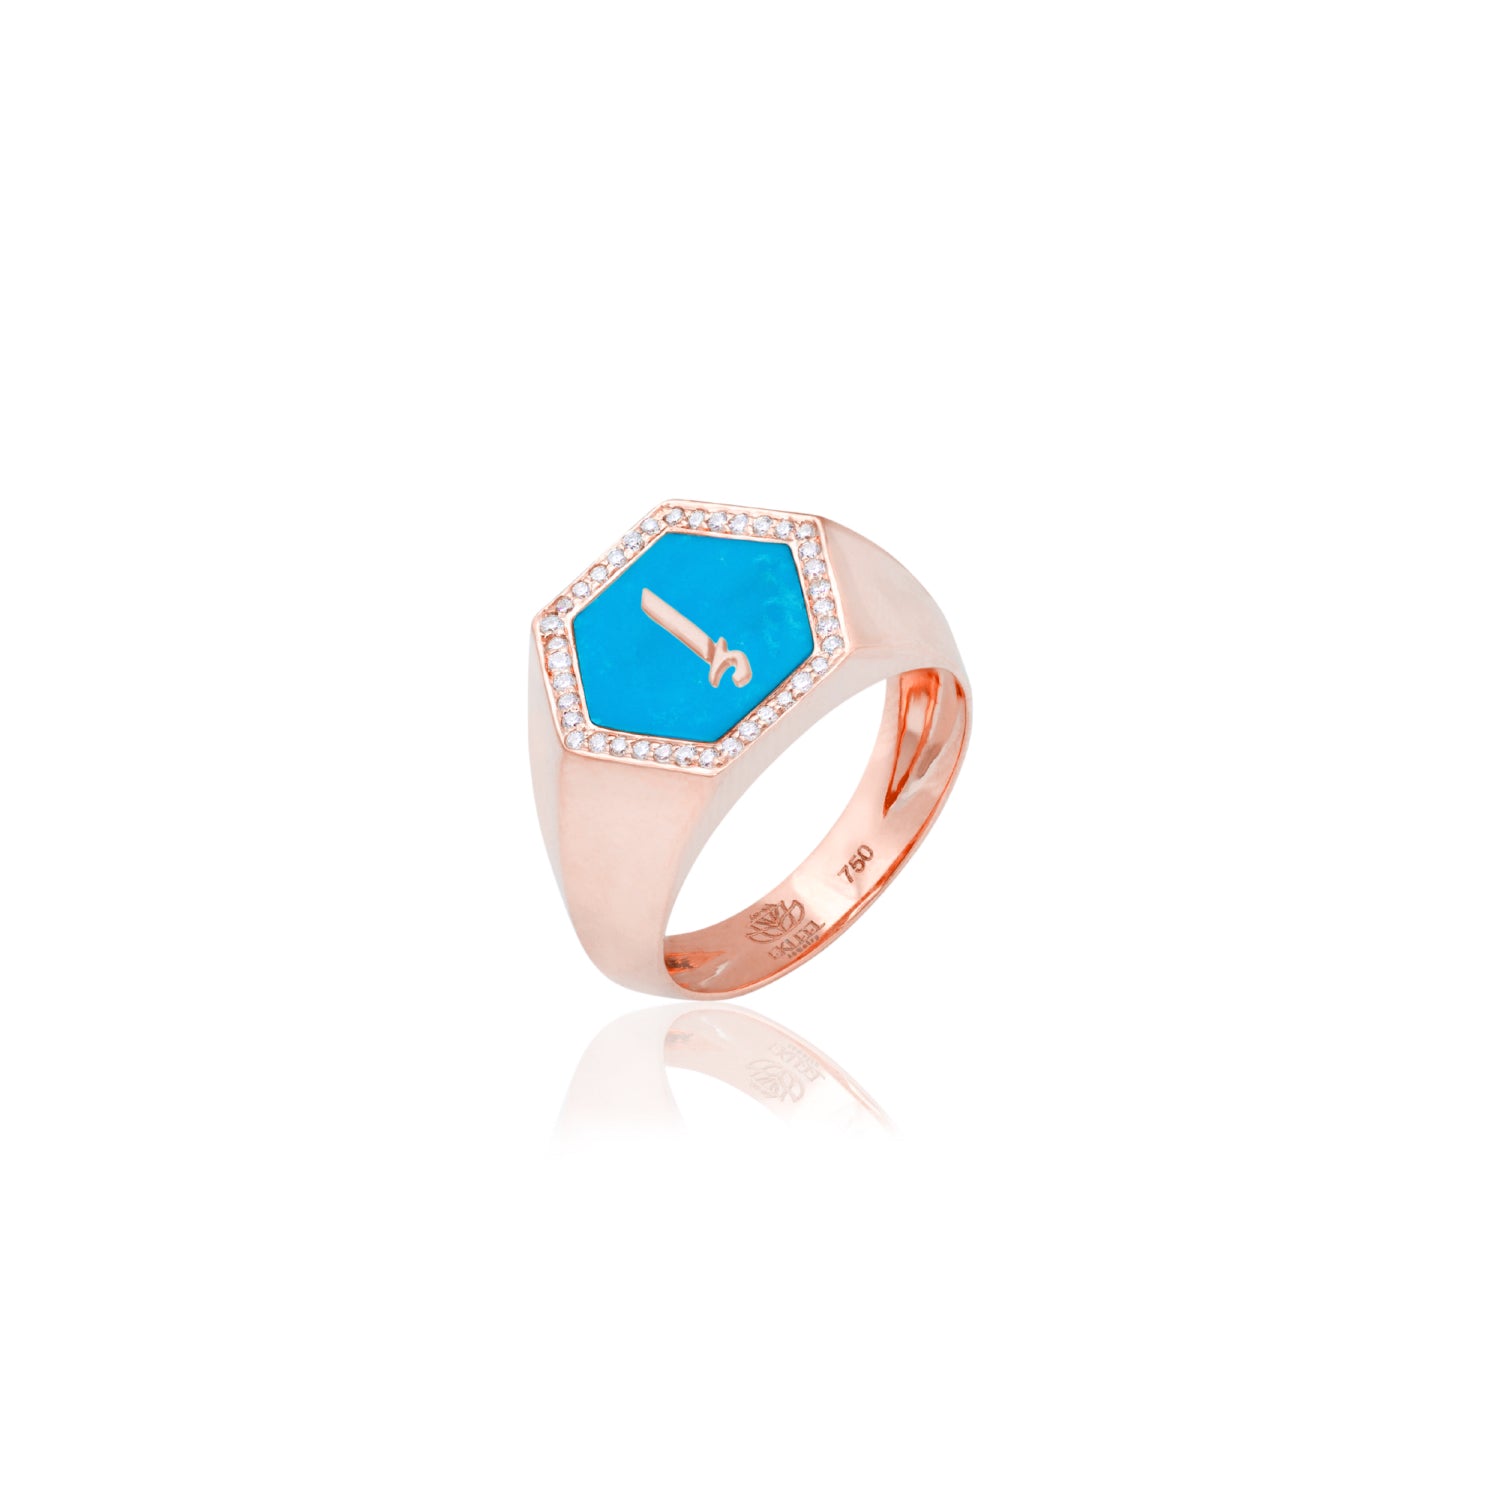 Qamoos 2.0 Letter إ Turquoise and Diamond Signet Ring in Rose Gold